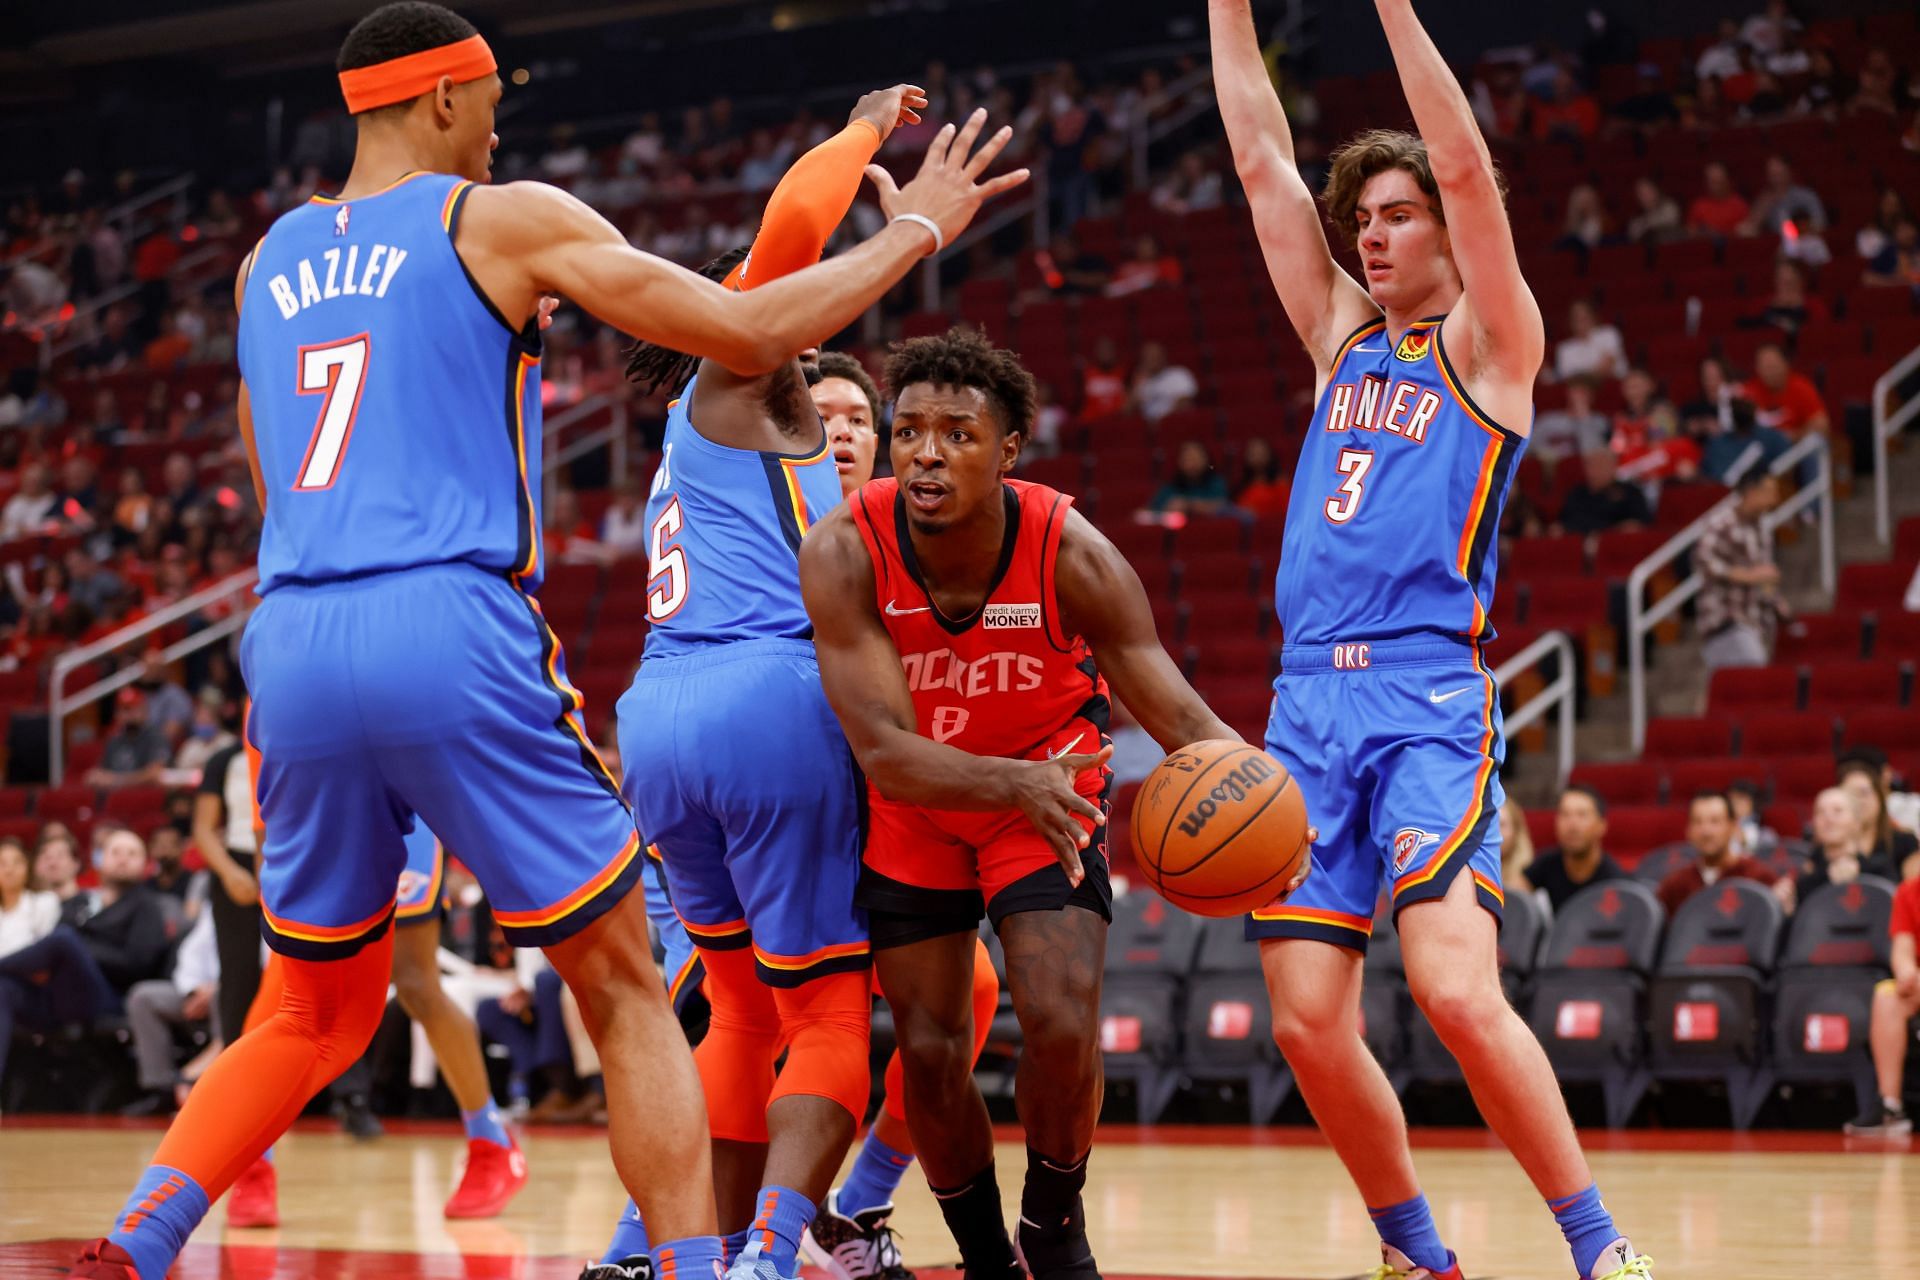 A snap from the match between the Oklahoma City Thunder and th Houston Rockets.